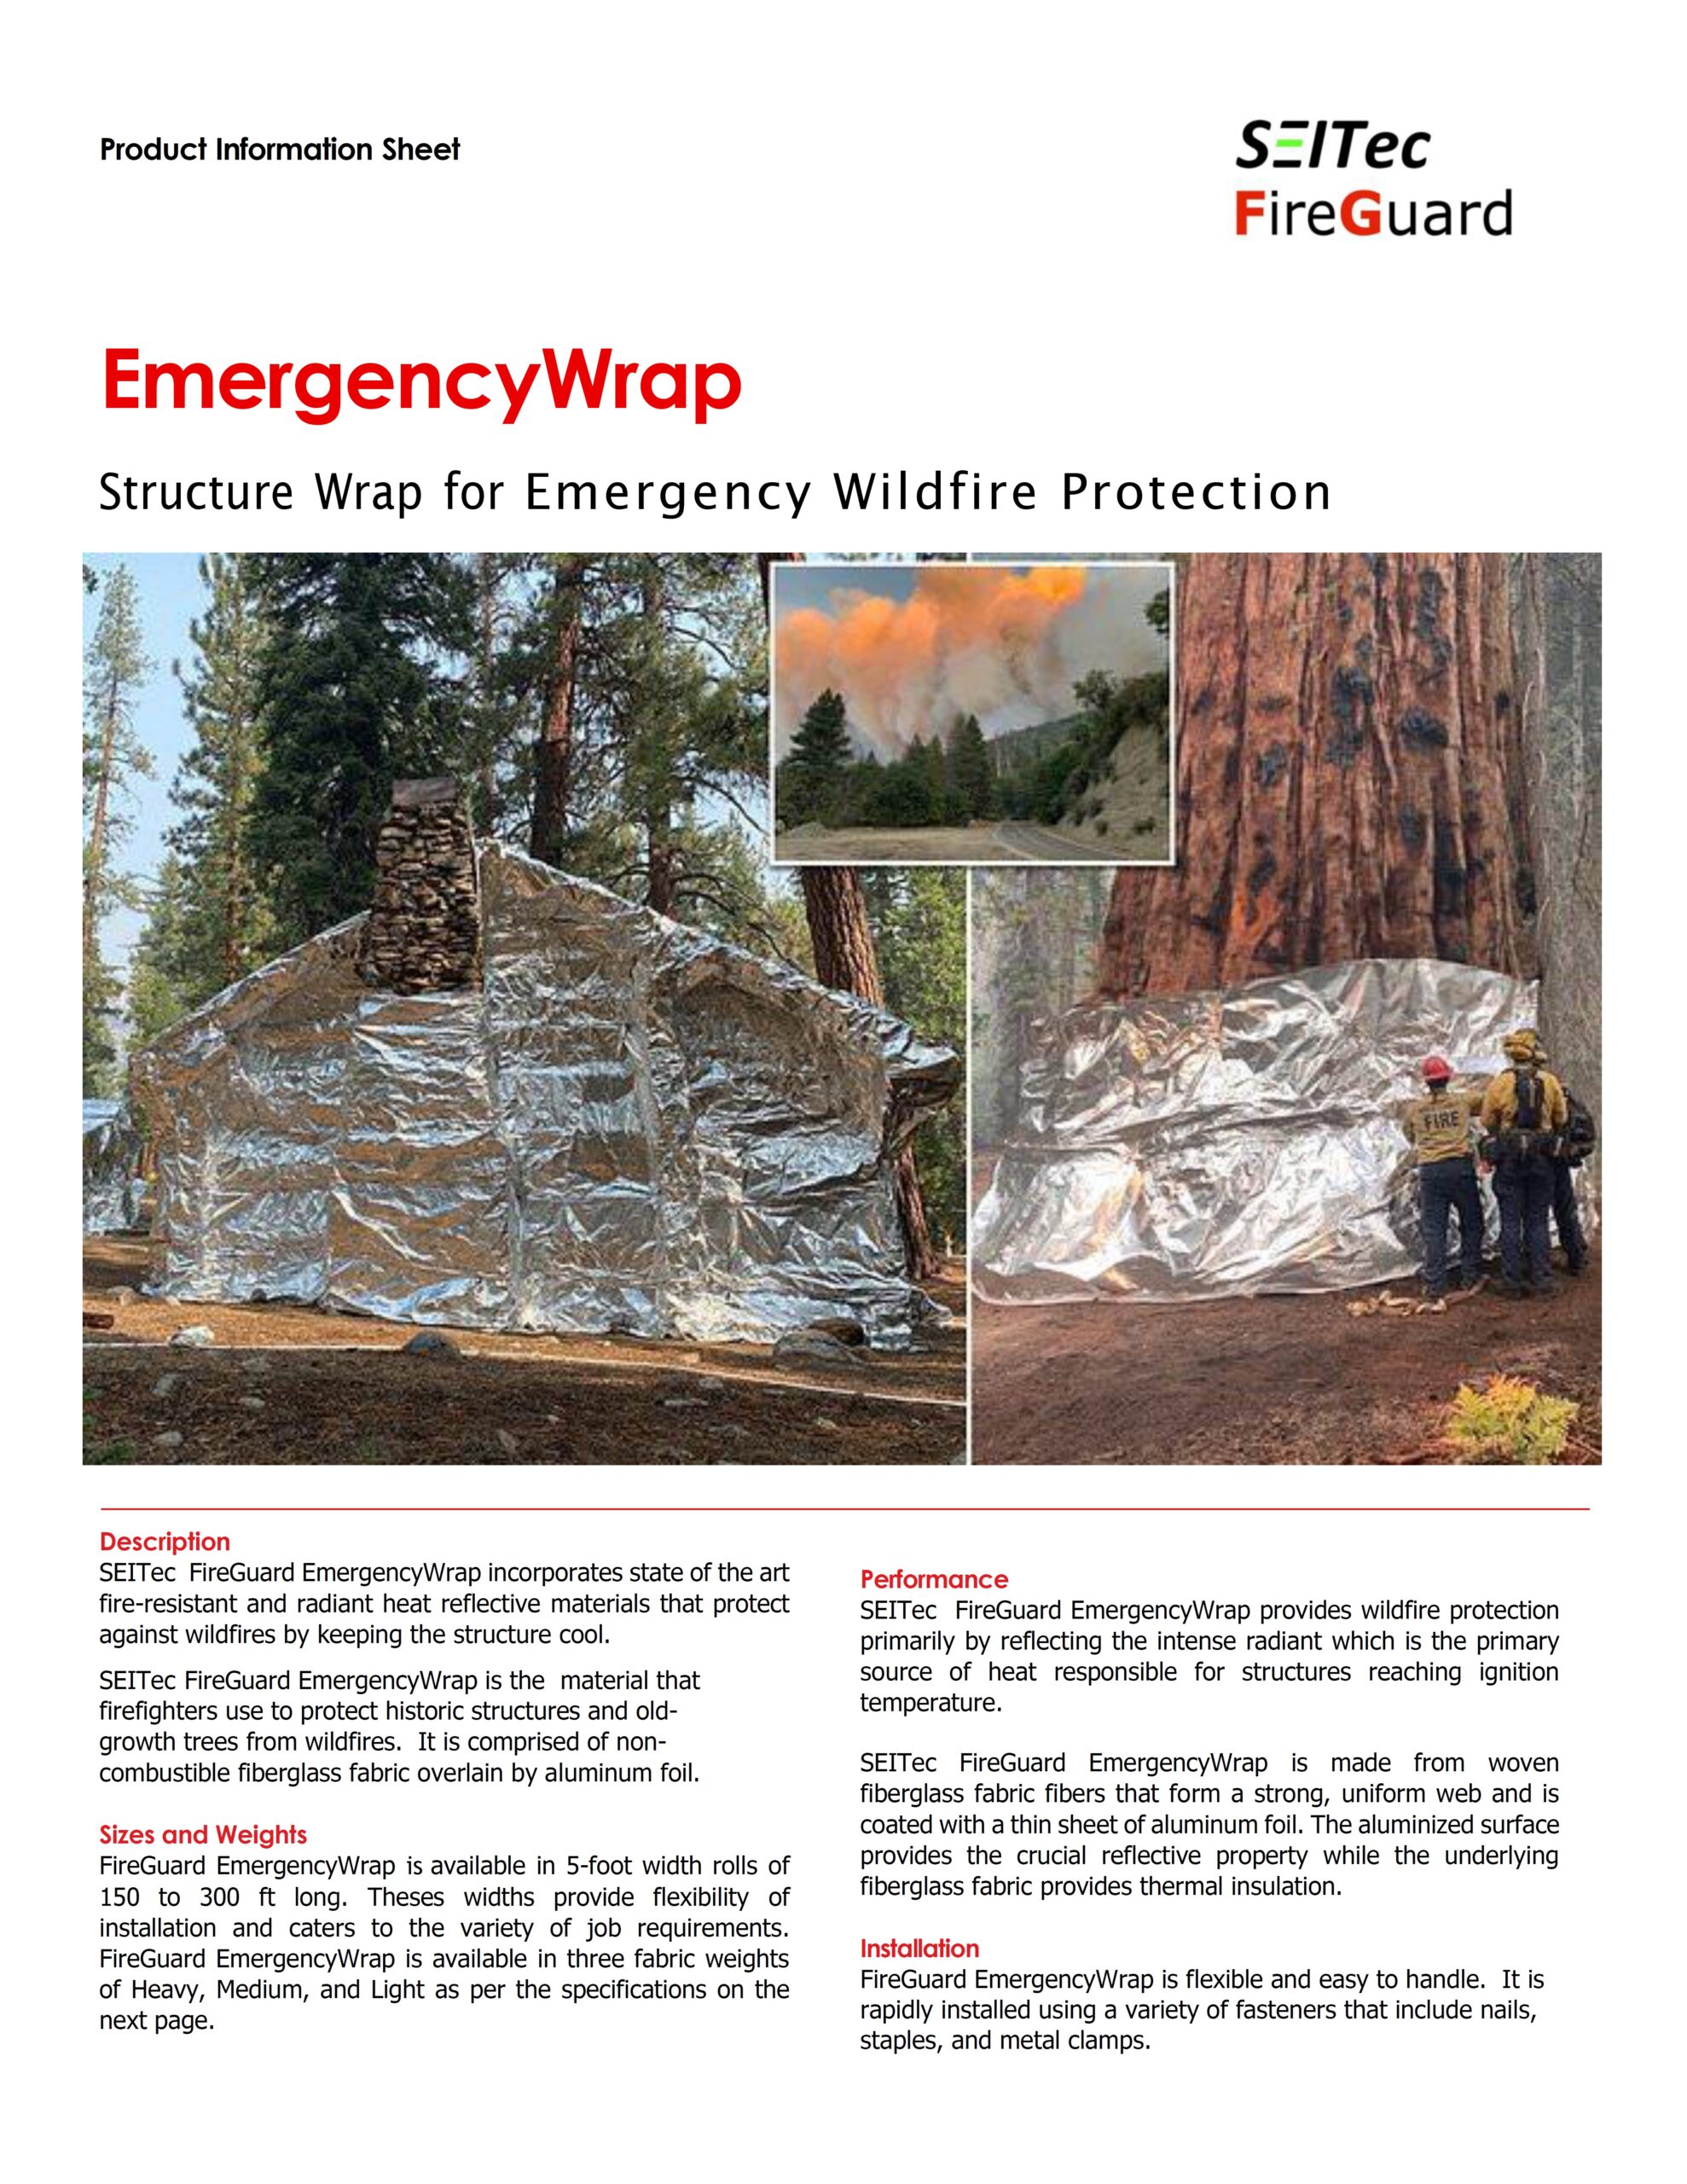 emergency fire protection wrap